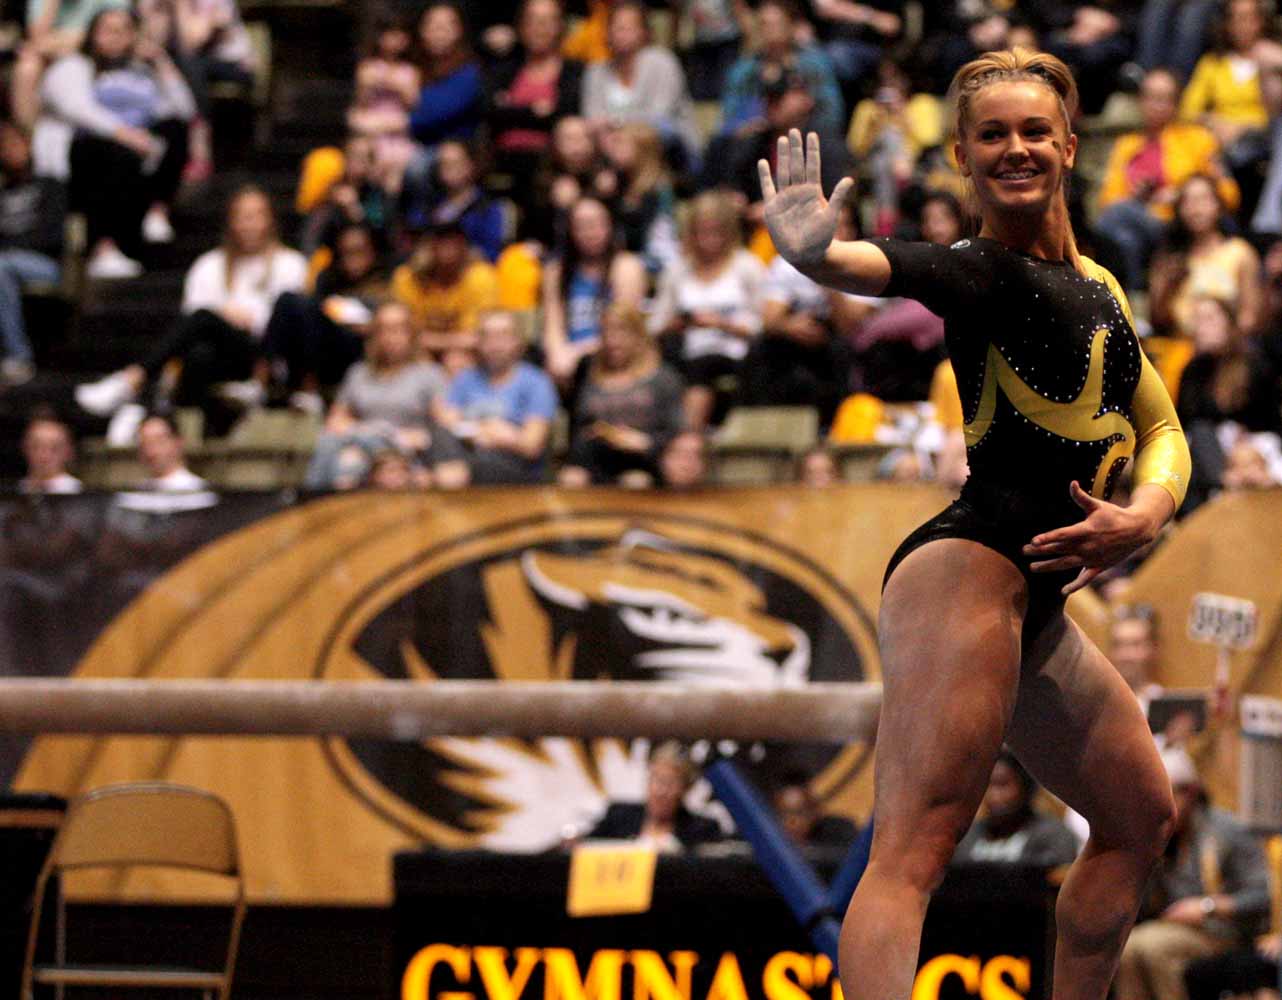 Mizzou freshman Morgan Porter poses during her floor routine performance Friday evening, Feb. 19, 2016 at the Hearnes Center near the end the gymnastics competition against the University of Florida.